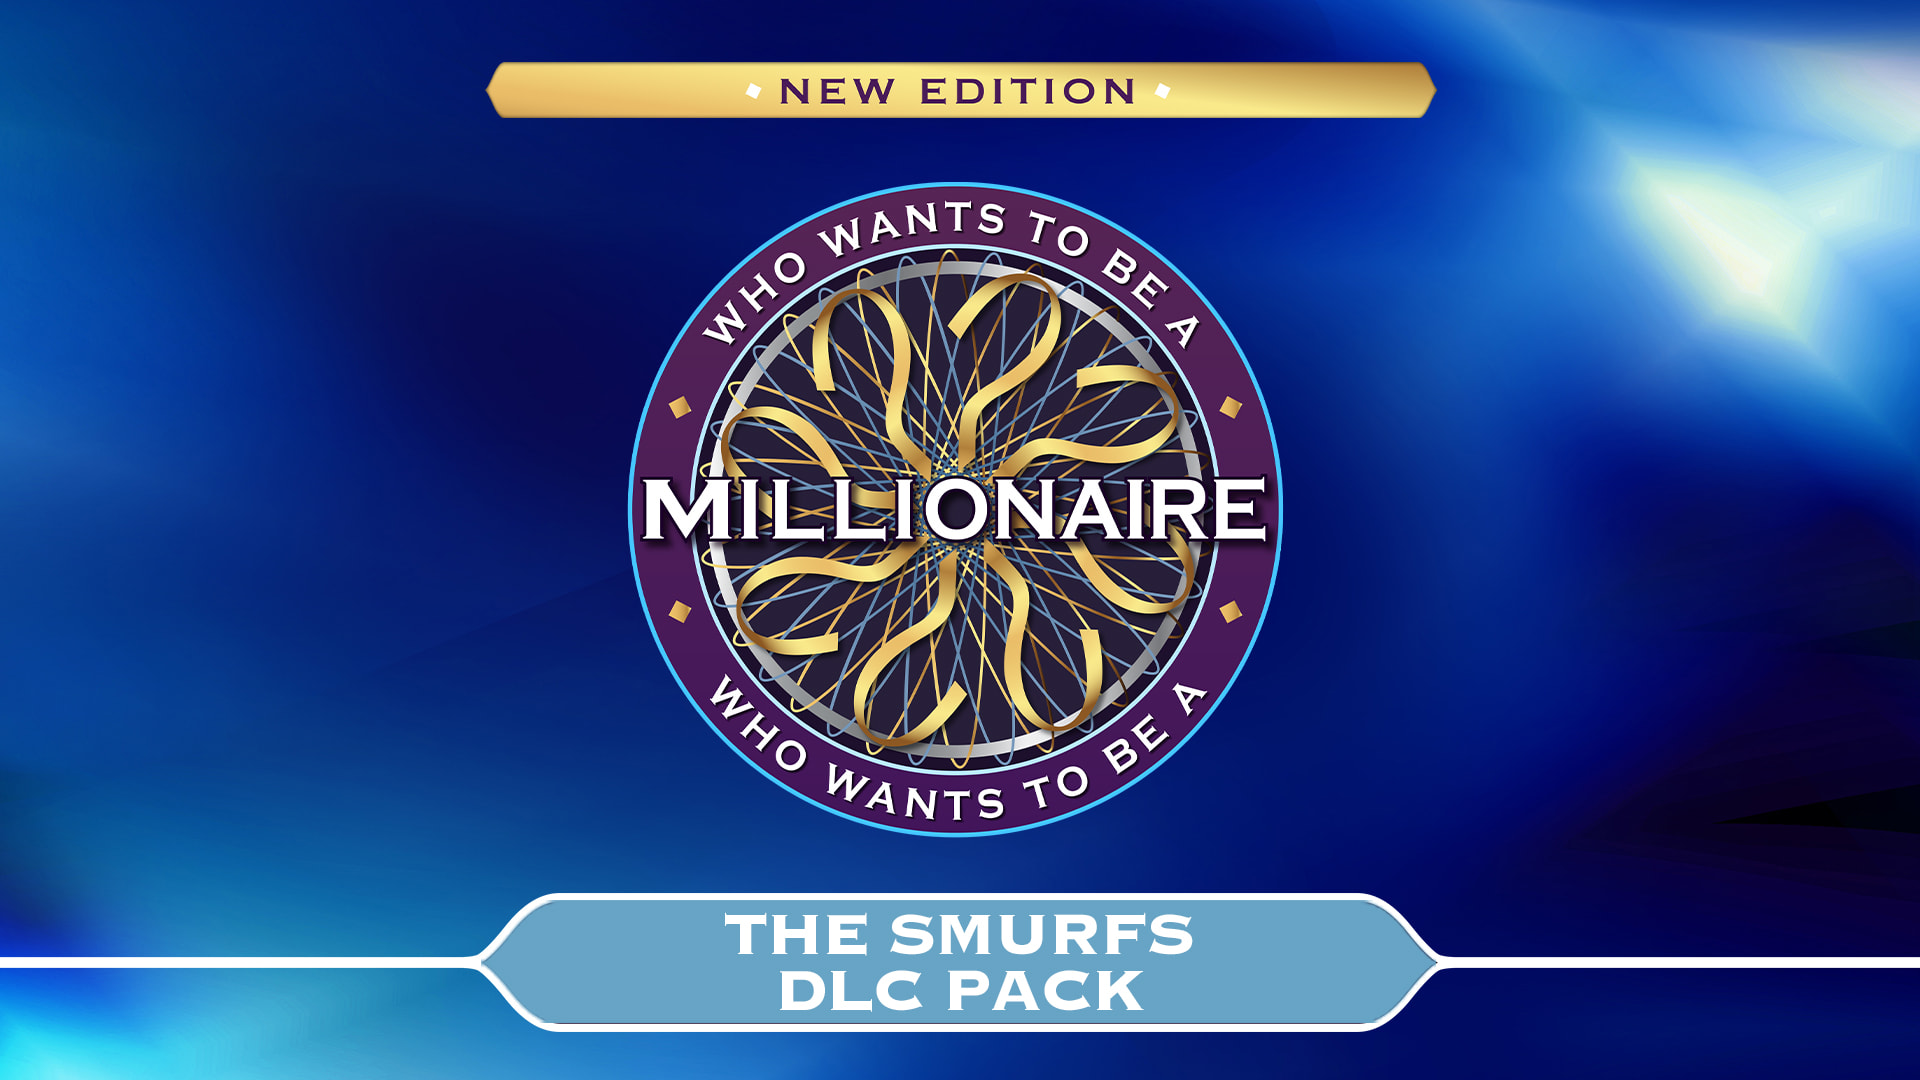 Who Wants To Be A Millionaire? - The Smurfs DLC Pack